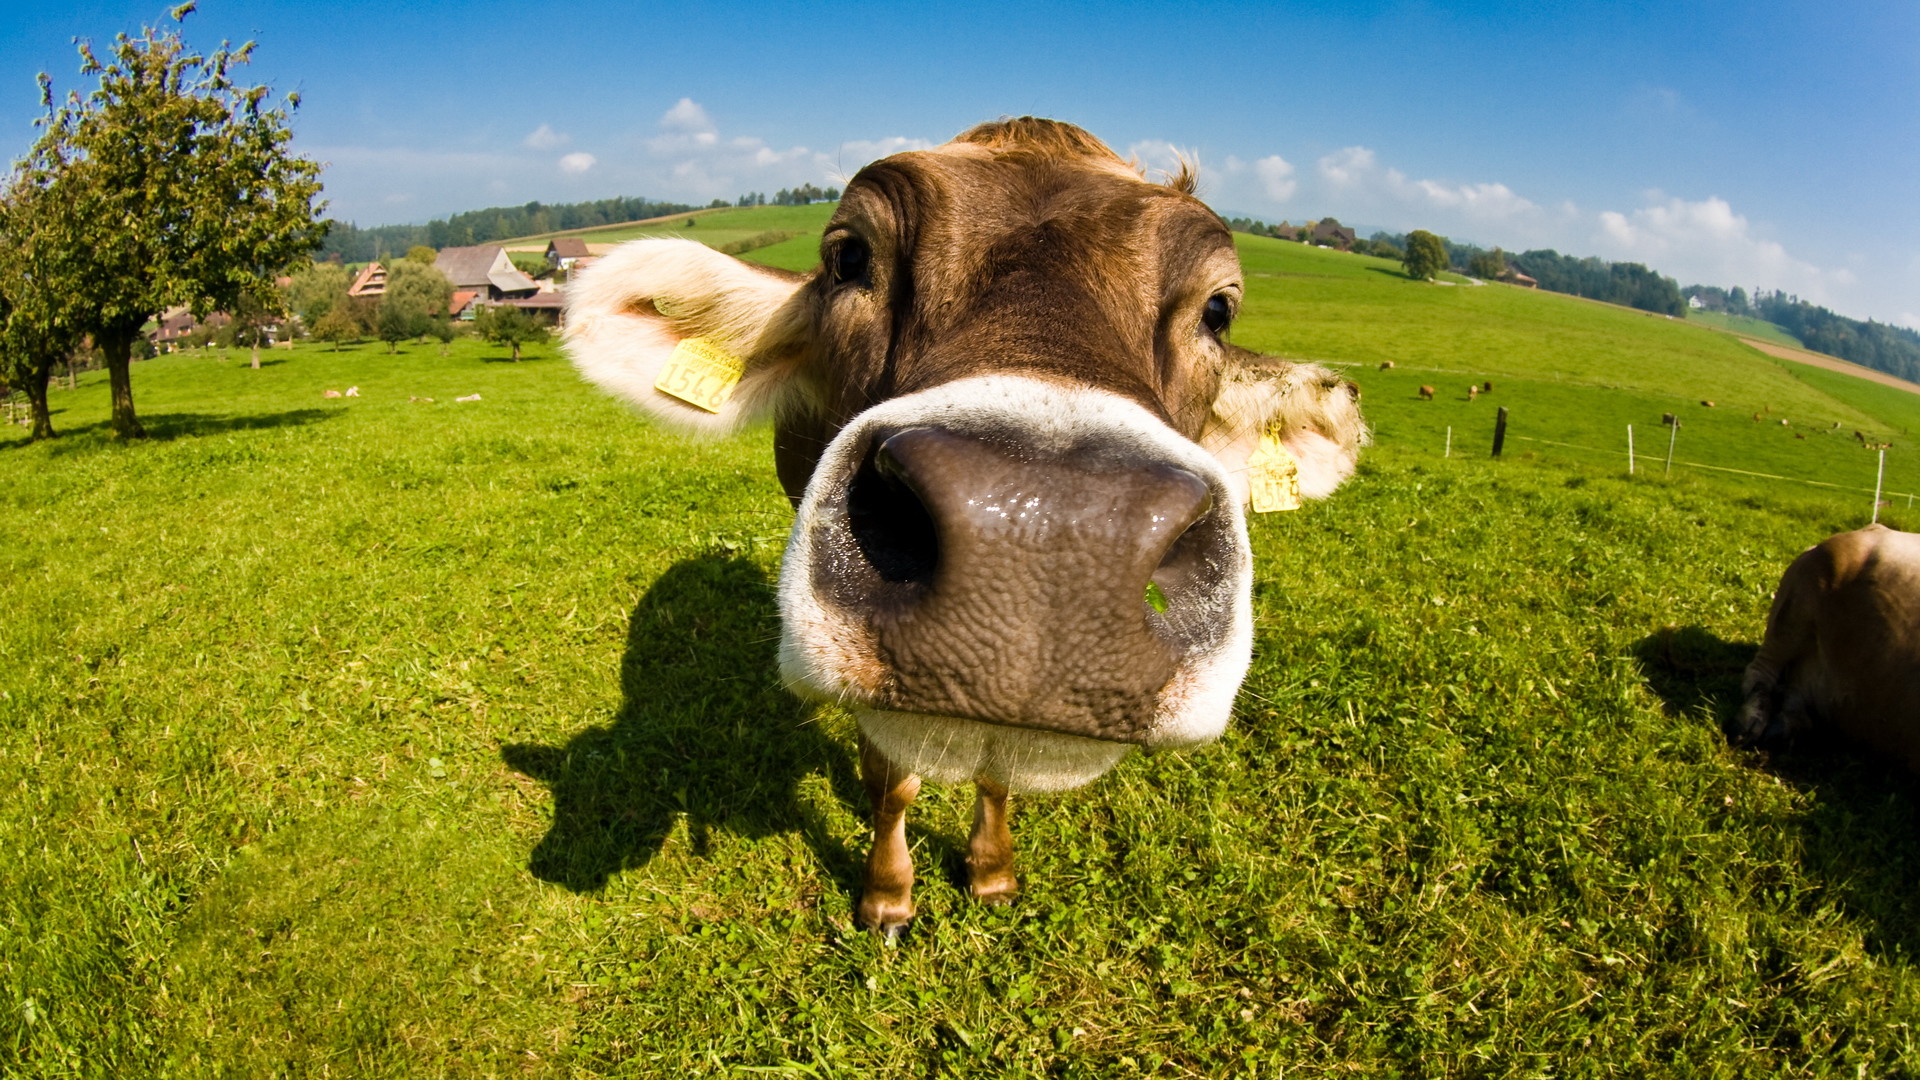 1920x1080 138 Cow HD Wallpapers | Backgrounds - Page 3